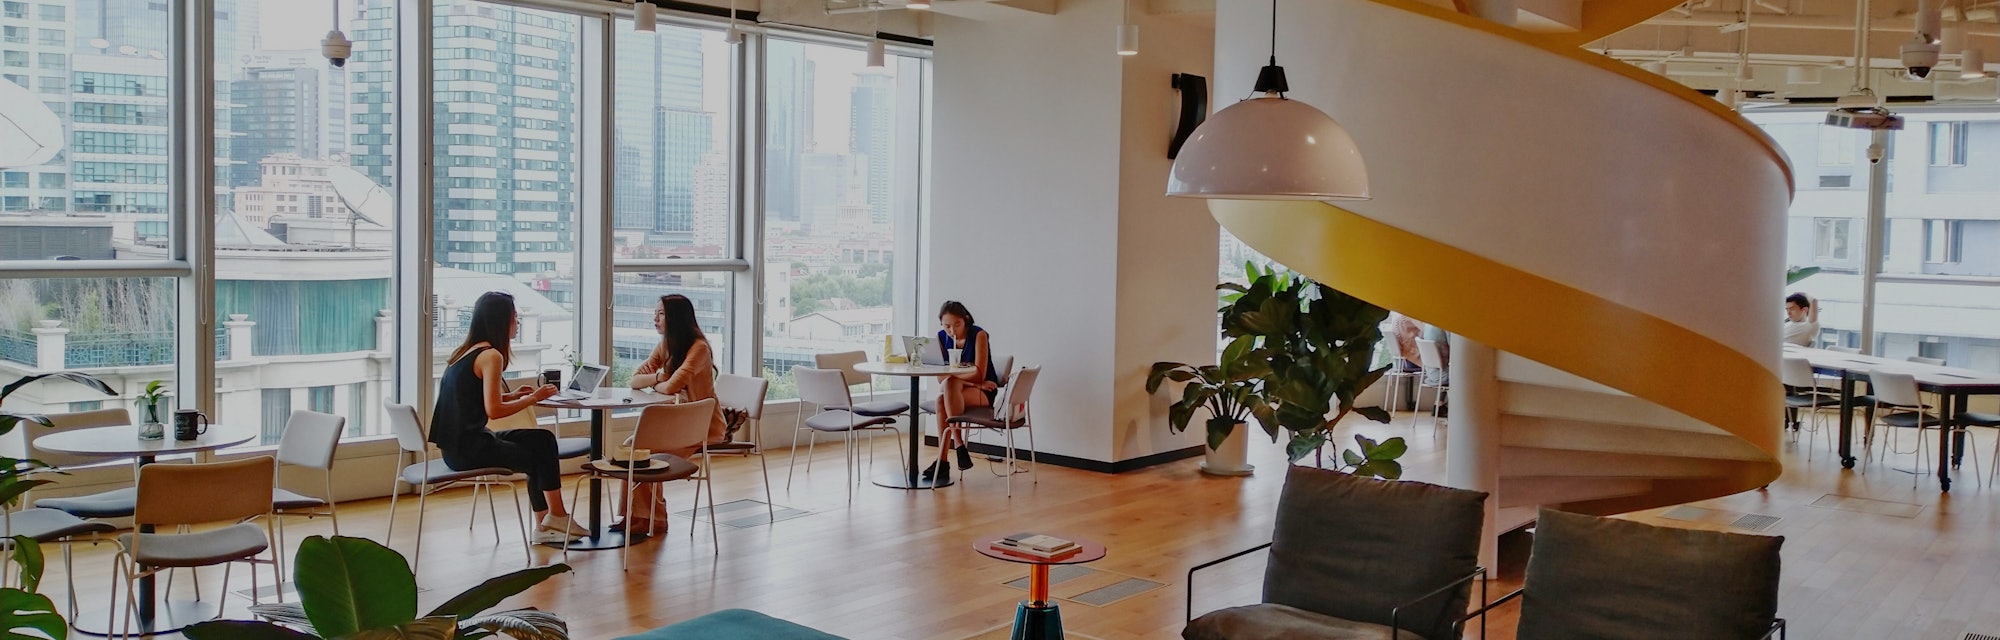 SHANGHAI, CHINA - AUGUST 13, 2019 - Employees work at a WeWork office in Shanghai, China, Aug. 13, 2...